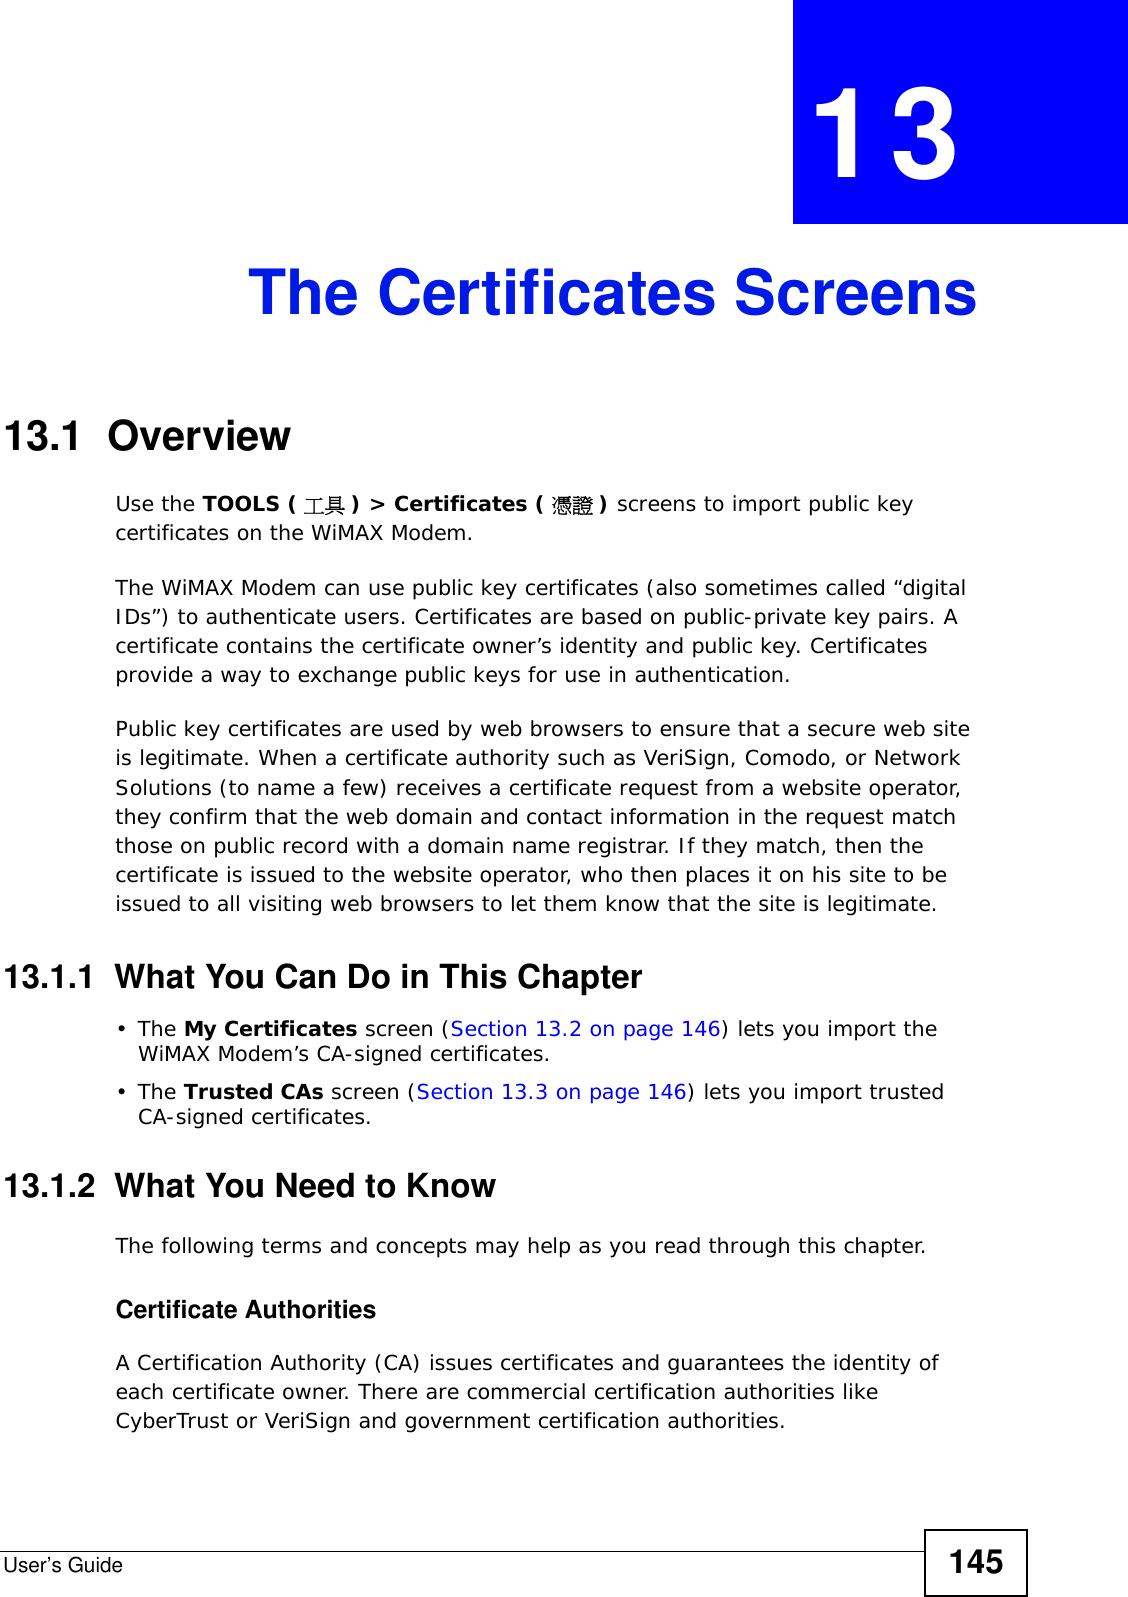 User’s Guide 145CHAPTER  13 The Certificates Screens13.1  OverviewUse the TOOLS ( 工具 ) &gt; Certificates ( 憑證 ) screens to import public key certificates on the WiMAX Modem.The WiMAX Modem can use public key certificates (also sometimes called “digital IDs”) to authenticate users. Certificates are based on public-private key pairs. A certificate contains the certificate owner’s identity and public key. Certificates provide a way to exchange public keys for use in authentication.Public key certificates are used by web browsers to ensure that a secure web site is legitimate. When a certificate authority such as VeriSign, Comodo, or Network Solutions (to name a few) receives a certificate request from a website operator, they confirm that the web domain and contact information in the request match those on public record with a domain name registrar. If they match, then the certificate is issued to the website operator, who then places it on his site to be issued to all visiting web browsers to let them know that the site is legitimate.13.1.1  What You Can Do in This Chapter•The My Certificates screen (Section 13.2 on page 146) lets you import the WiMAX Modem’s CA-signed certificates.•The Trusted CAs screen (Section 13.3 on page 146) lets you import trusted CA-signed certificates.13.1.2  What You Need to KnowThe following terms and concepts may help as you read through this chapter.Certificate AuthoritiesA Certification Authority (CA) issues certificates and guarantees the identity of each certificate owner. There are commercial certification authorities like CyberTrust or VeriSign and government certification authorities.